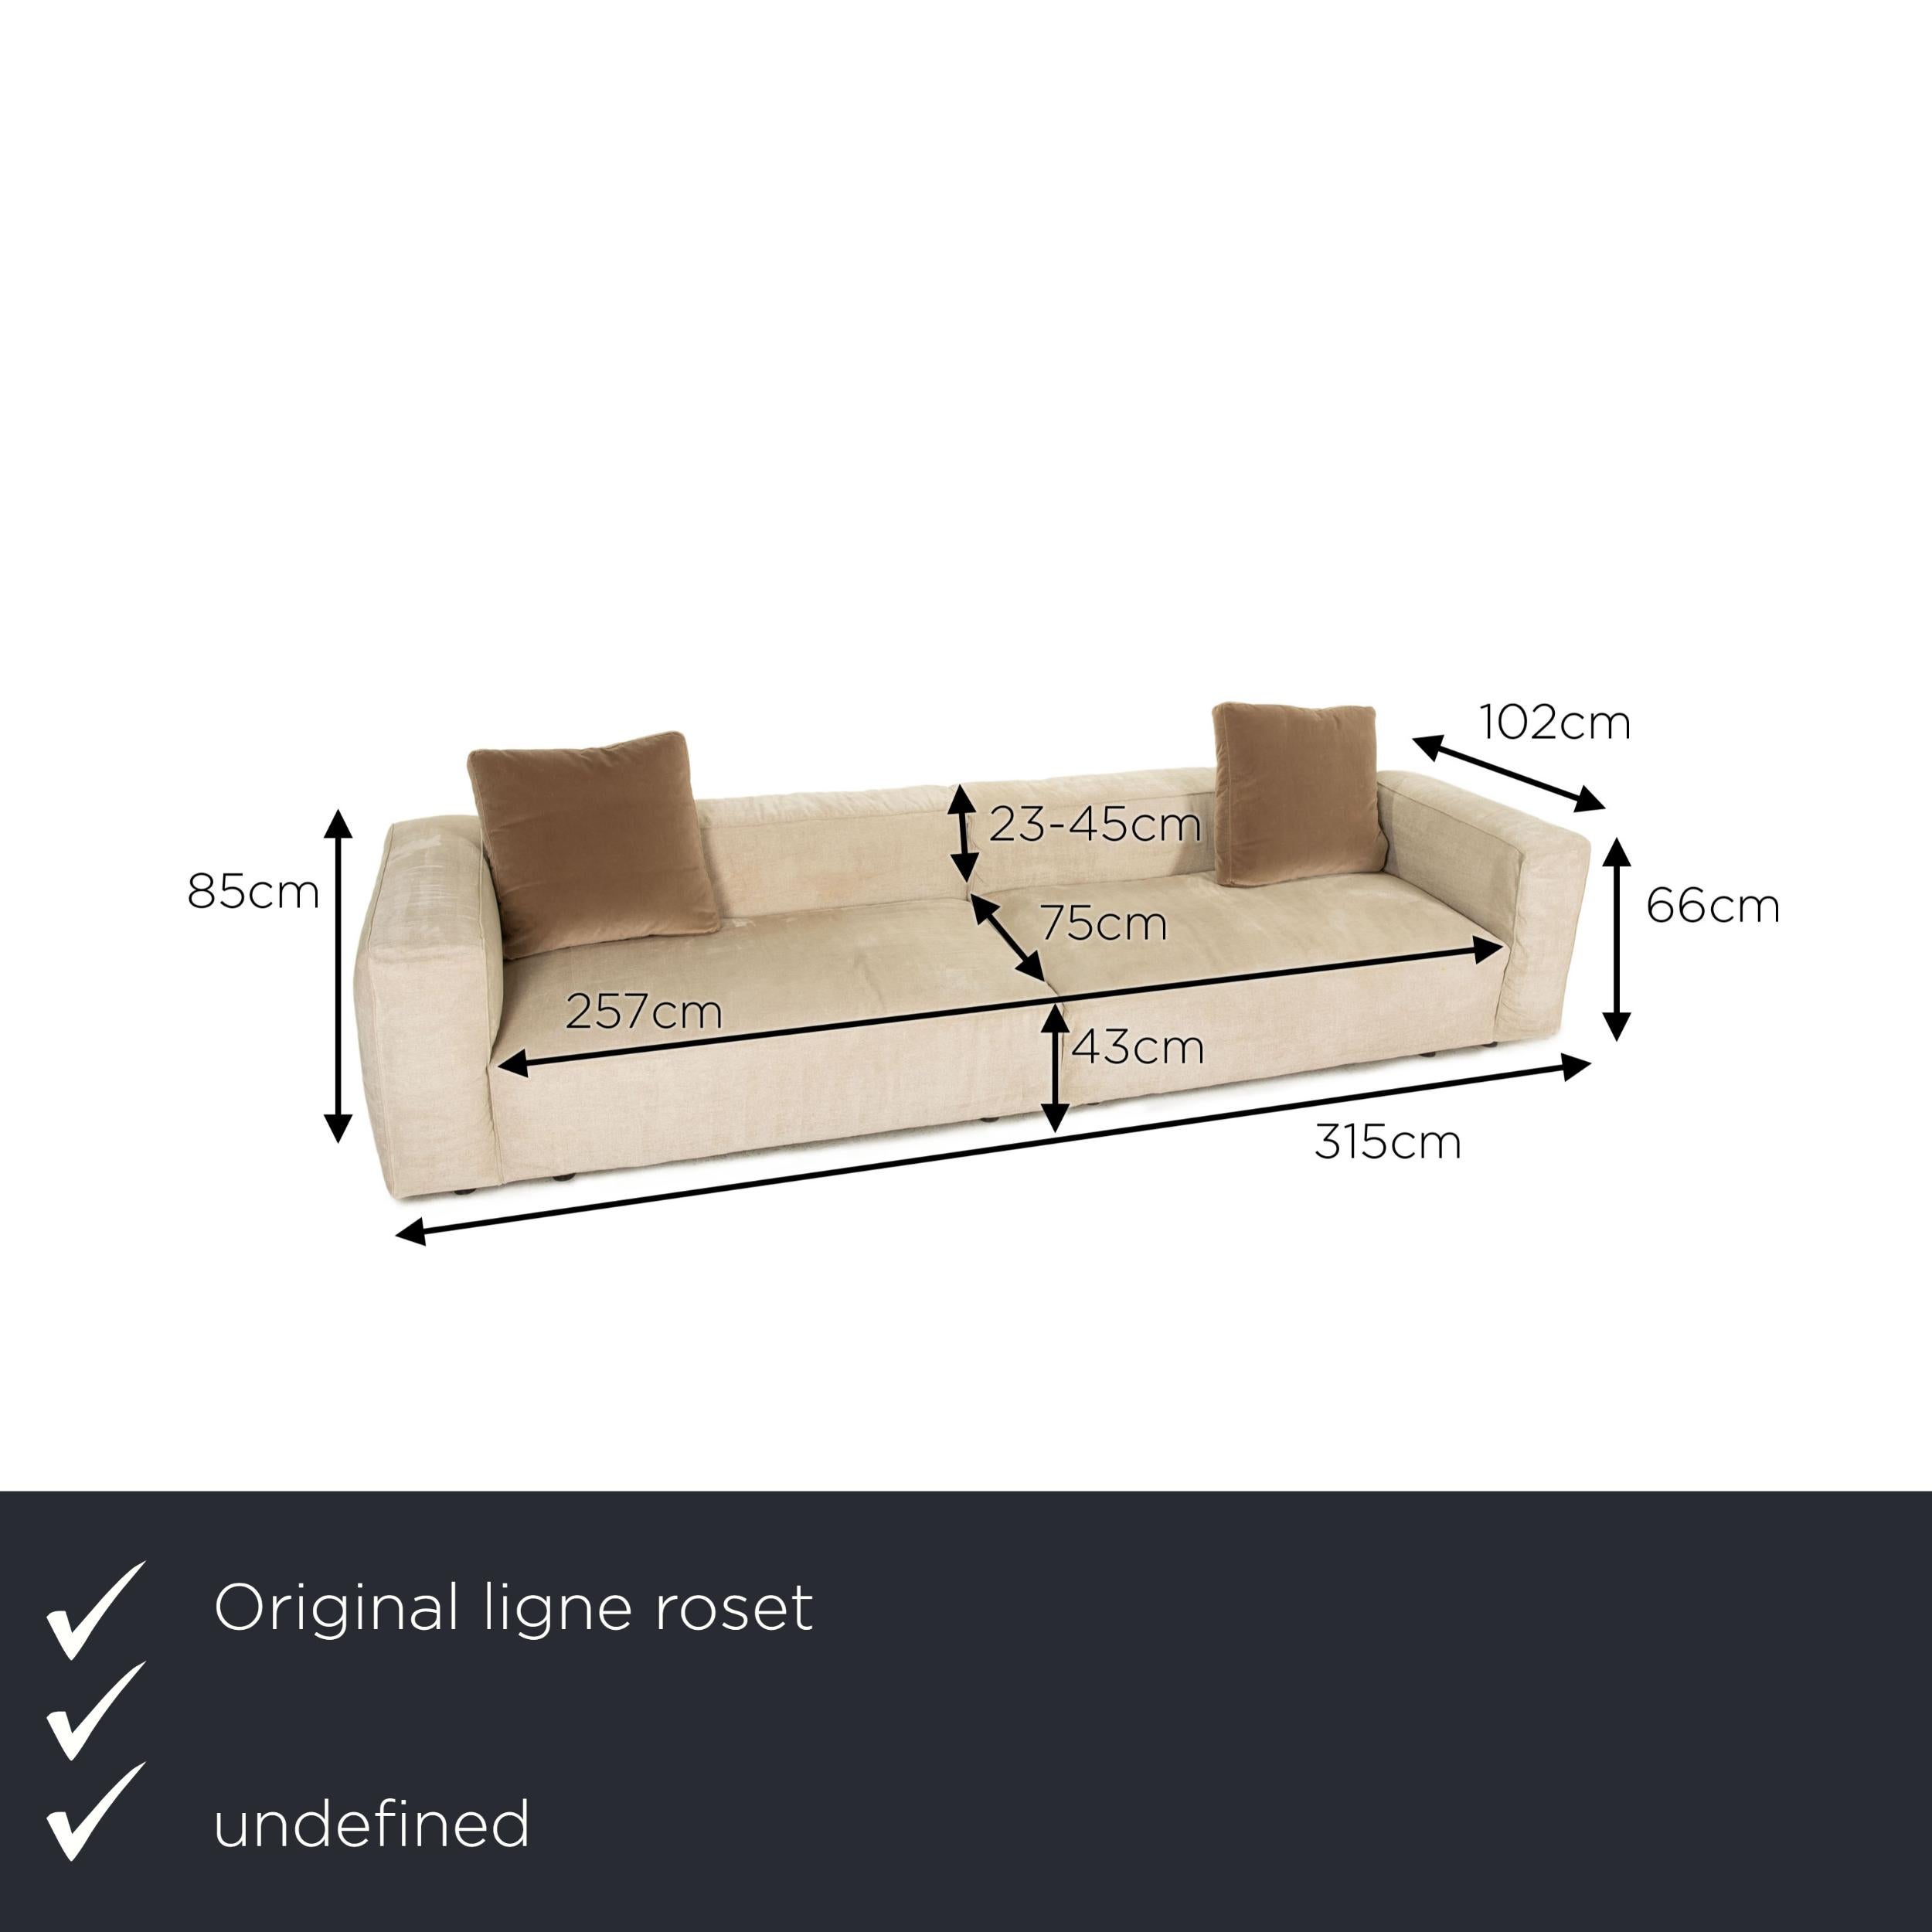 We present to you a Ligne Roset Nils fabric sofa set cream 1x four-seat 1x stool.
 SKU: #17110
 

 Product measurements in centimeters:
 

 depth: 102
 width: 315
 height: 85
 seat height: 43
 rest height: 66
 seat depth: 75
 seat